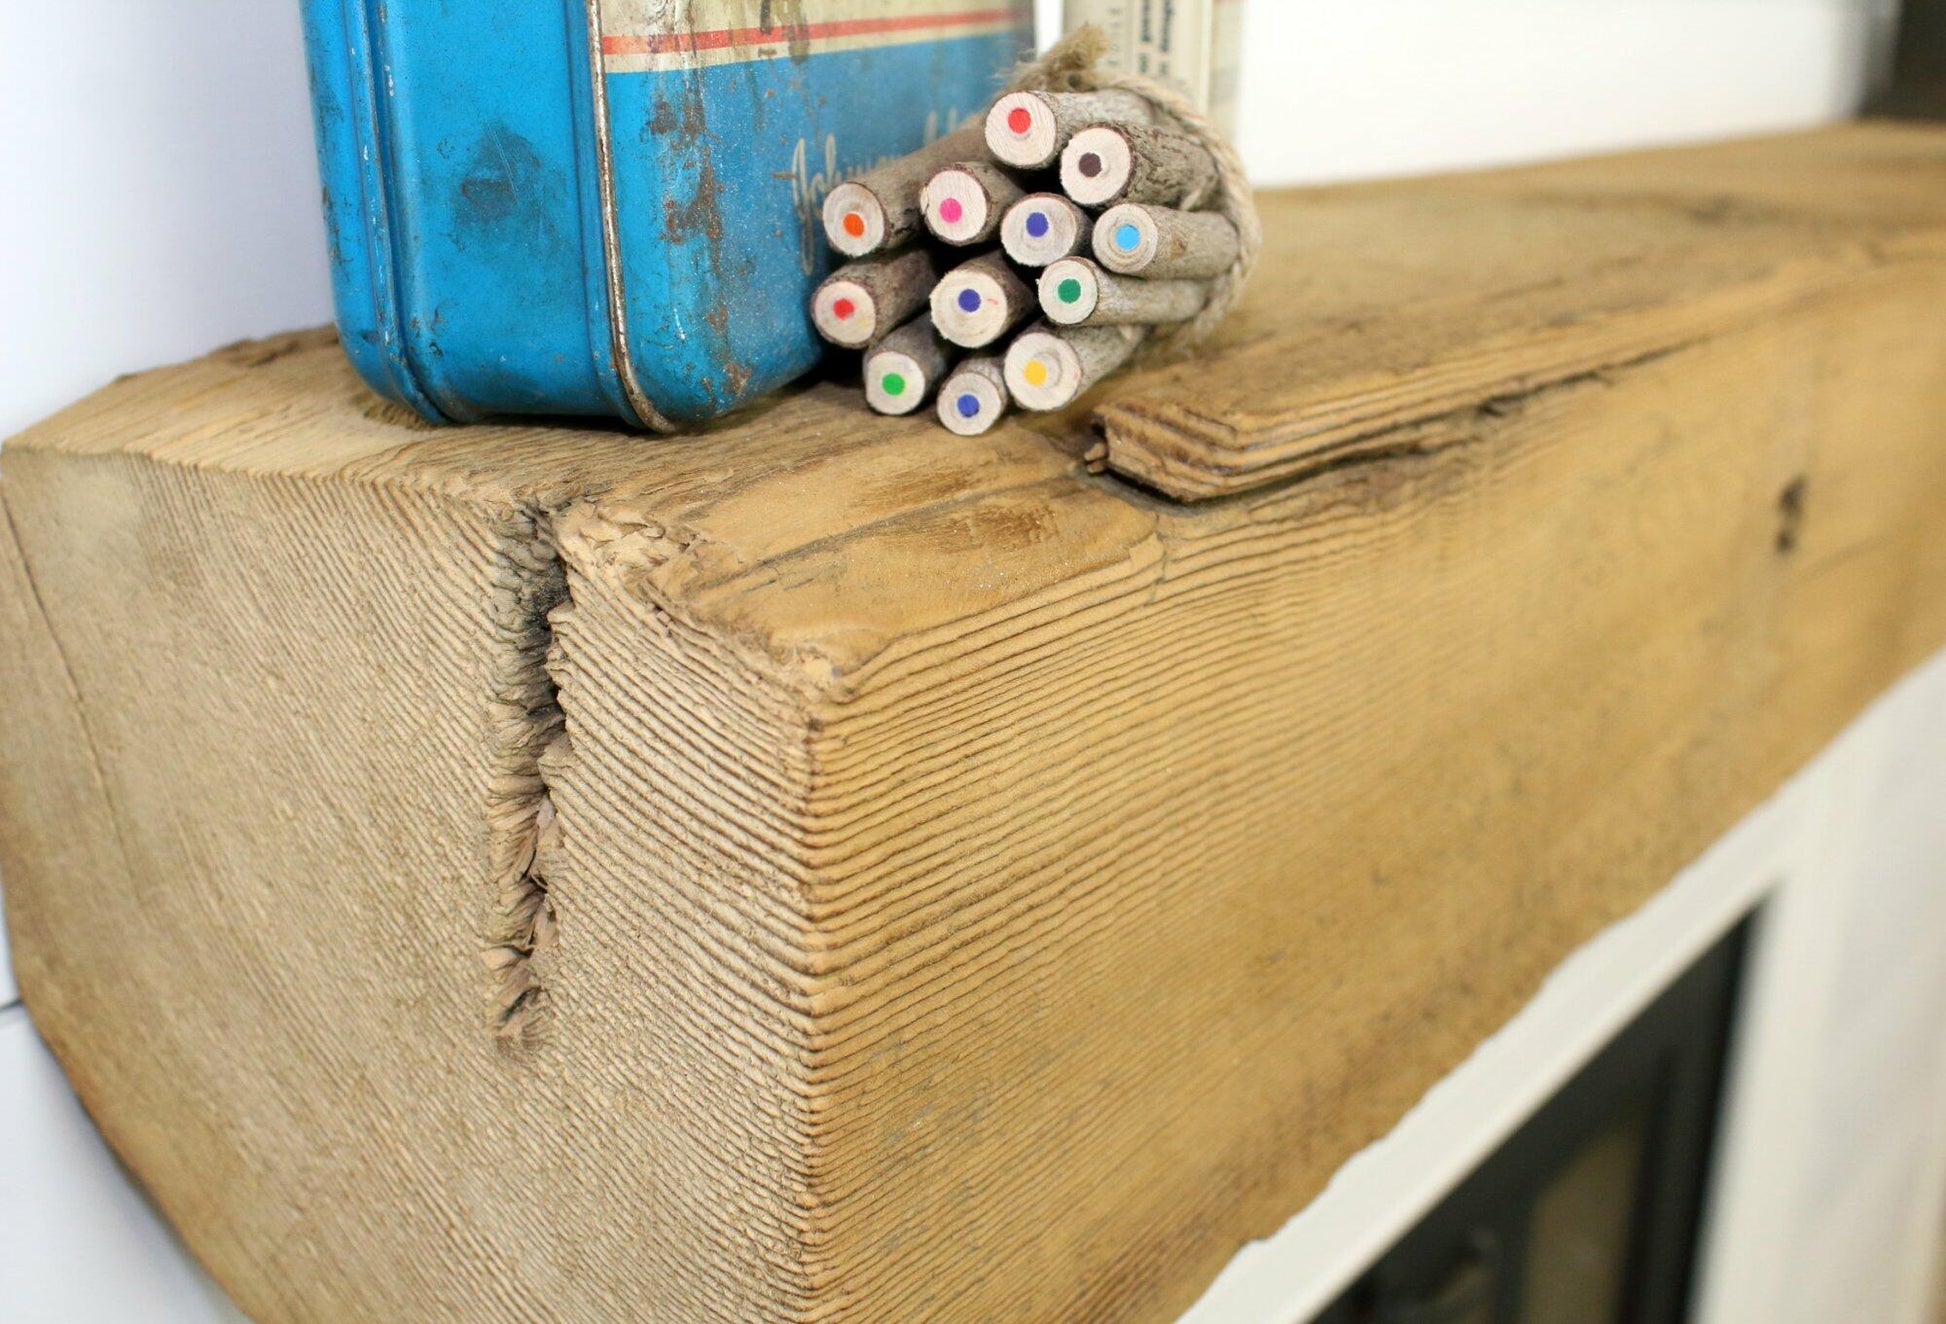 a close up of a reclaimed wood fireplace mantel in its natural color in the sanded option. Roughness of mantel, grain patterns, and texture are shown.